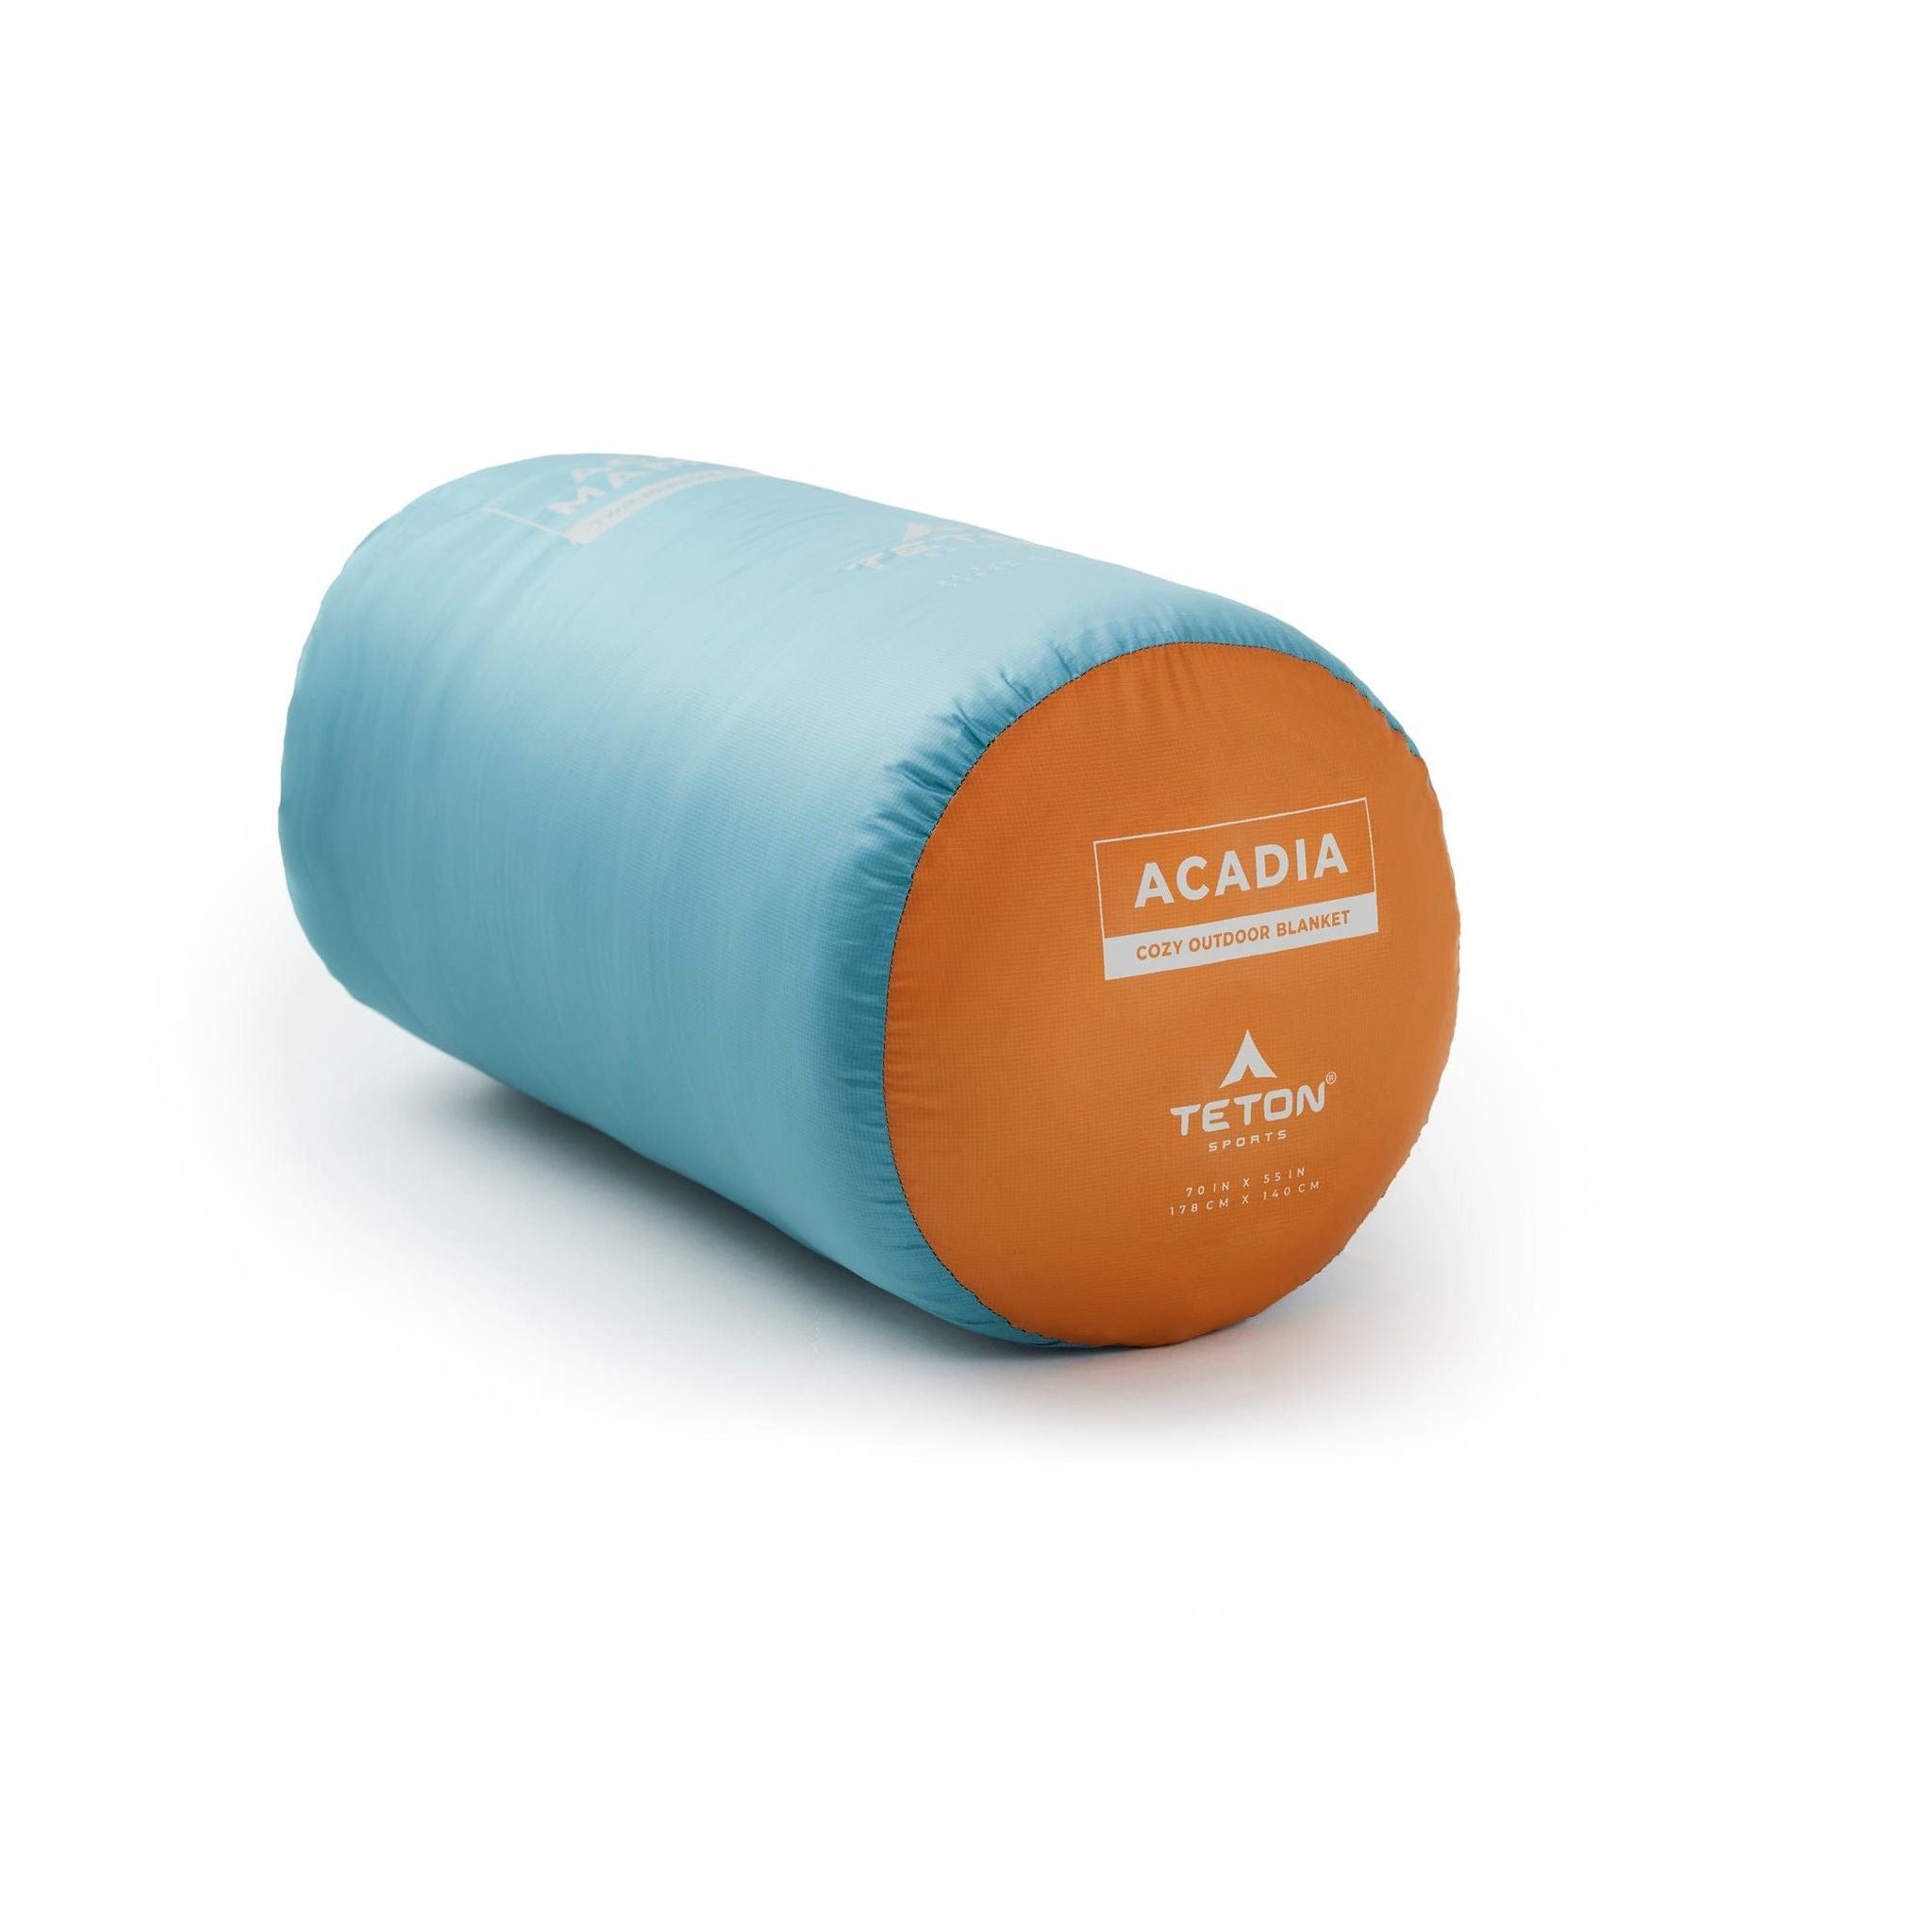 Teton Sports Acadia Outdoor Camp Blanket in Teal/Copper